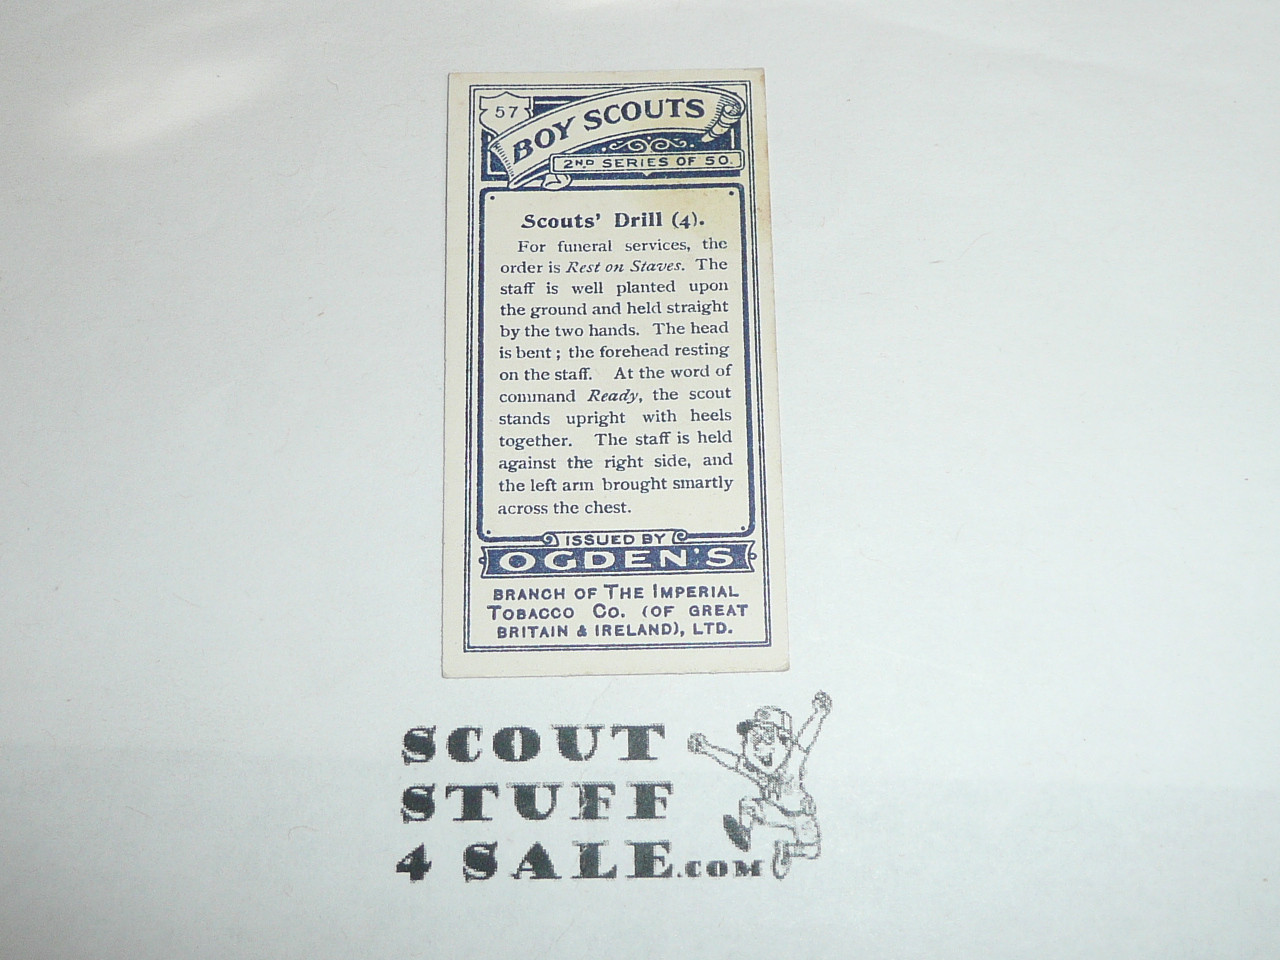 Ogden Tabacco Company Premium Card, Second Boy Scout Series of 50 (Blue Backs), Card #57 Scouts' Drill, 1912